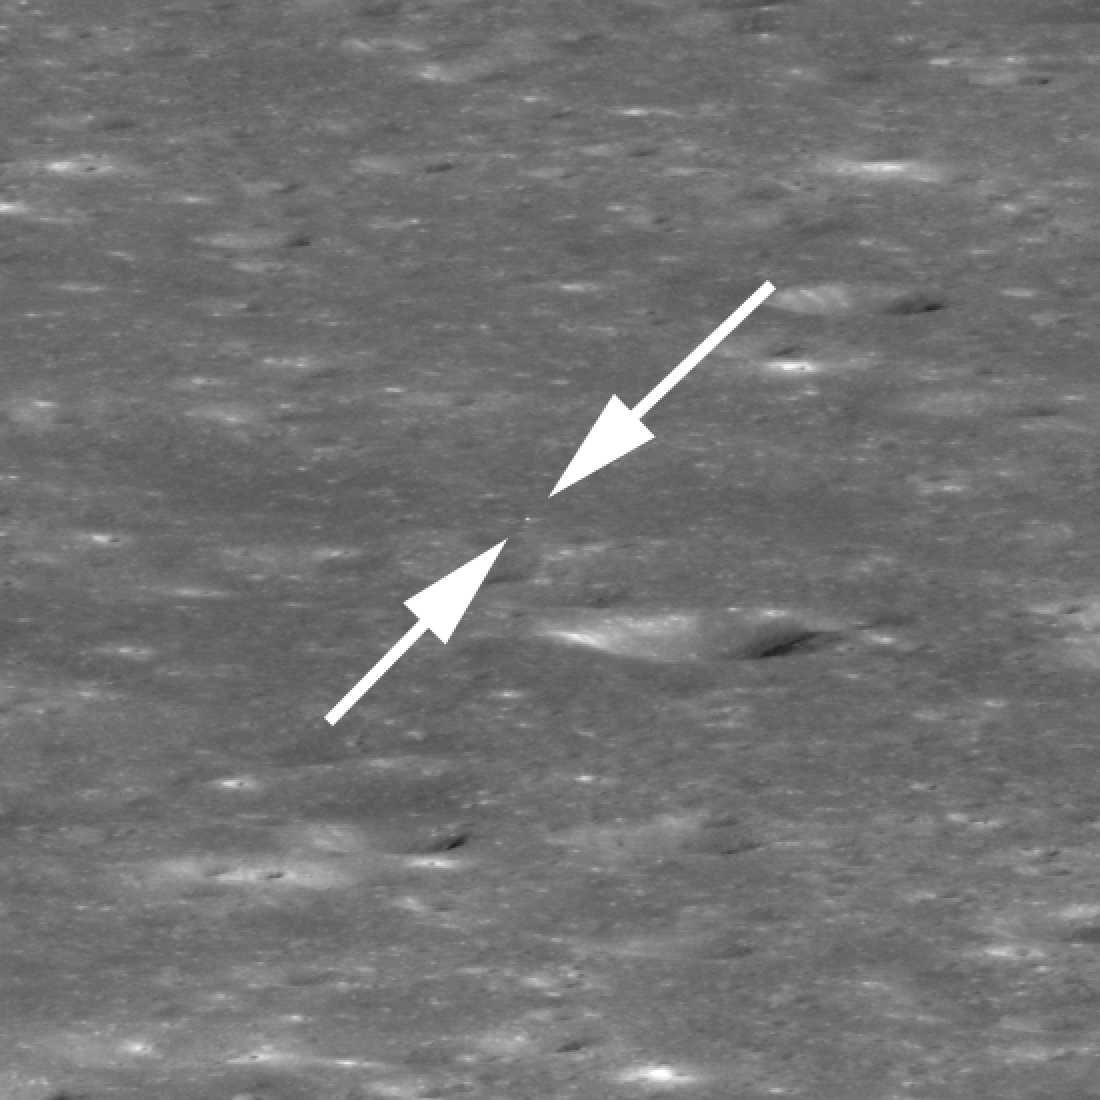 zoomed in view with arrows marking the rover, seen as a dot